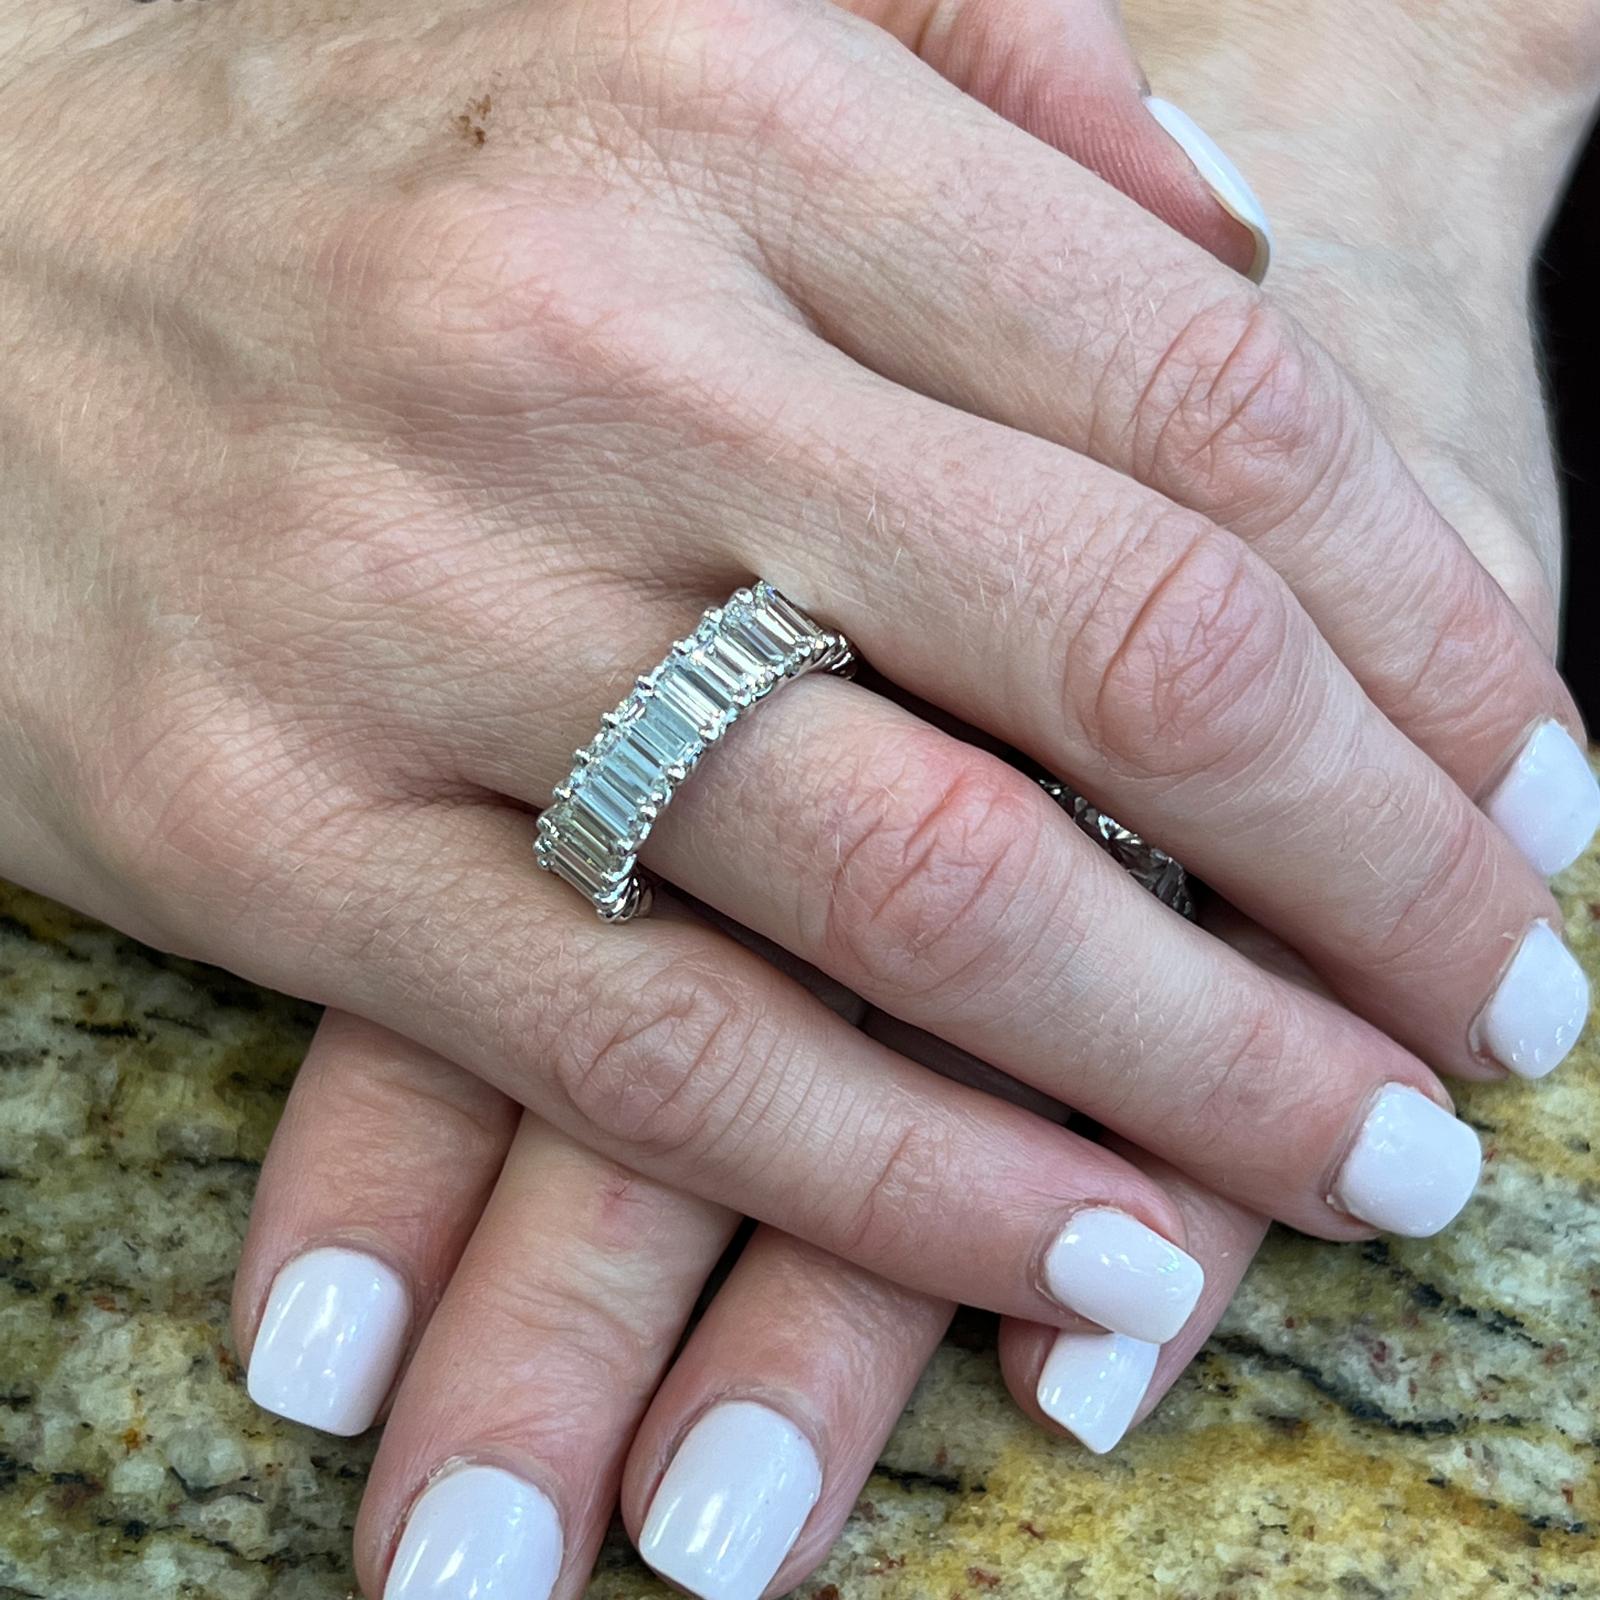 Stunning baguette diamond band handcrafted in 18 karat white gold. The ring features 17 baguette cut diamonds weighing 5.75 carat total weight and graded H color and VS clarity. The diamonds are set in a 'U' prong mounting, and the diamonds go 3/4